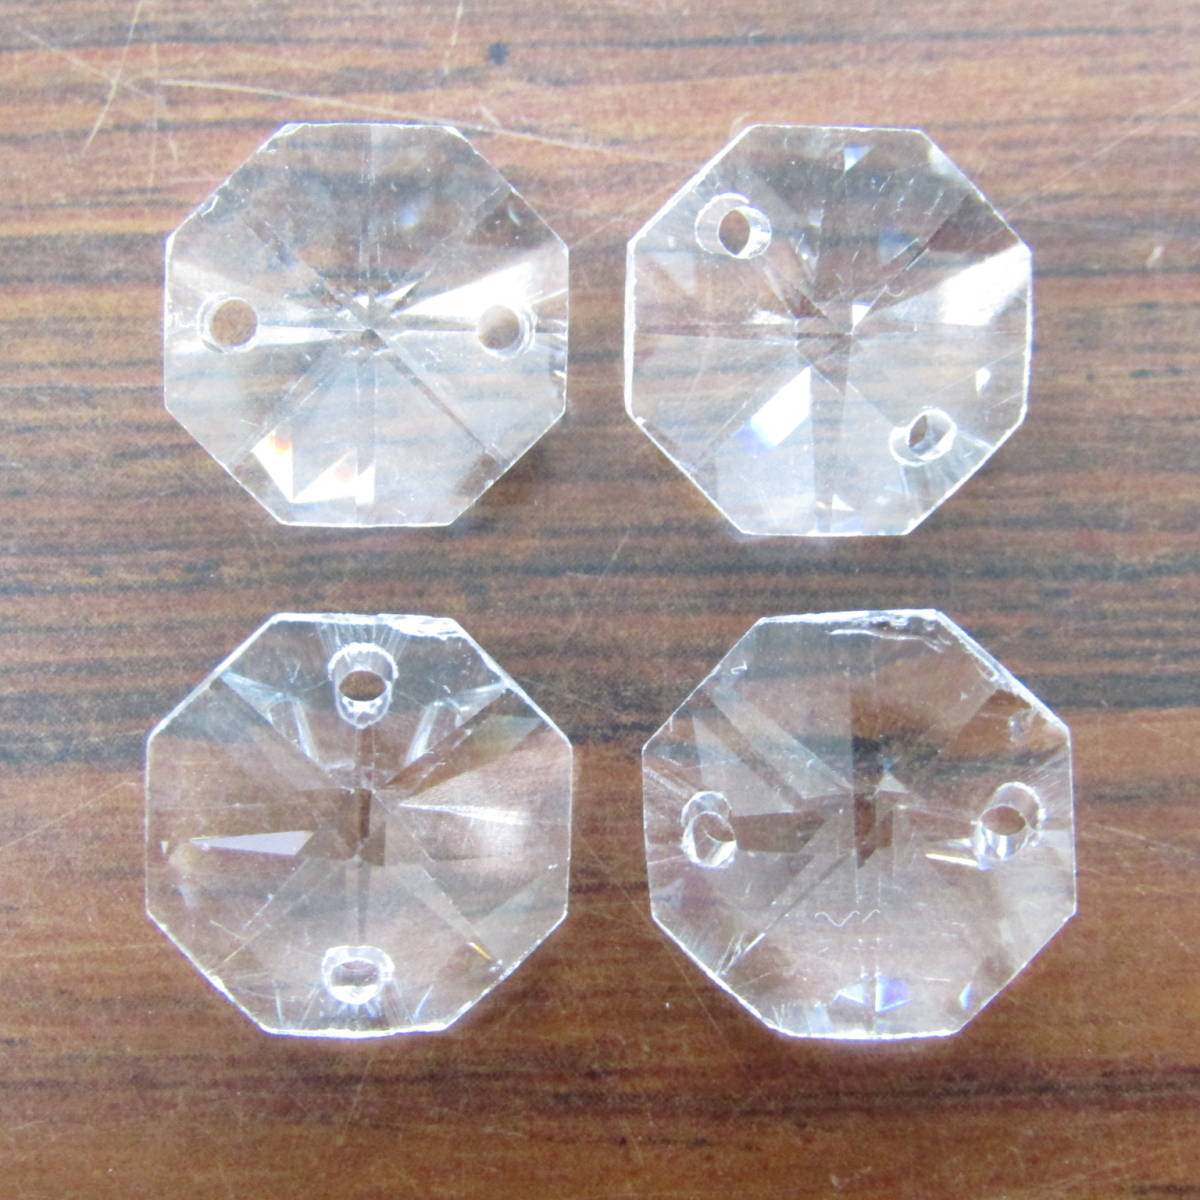  free shipping Junk with special circumstances suncatcher parts star anise crystal glass beads 2. hole 14mm clear 140 piece 